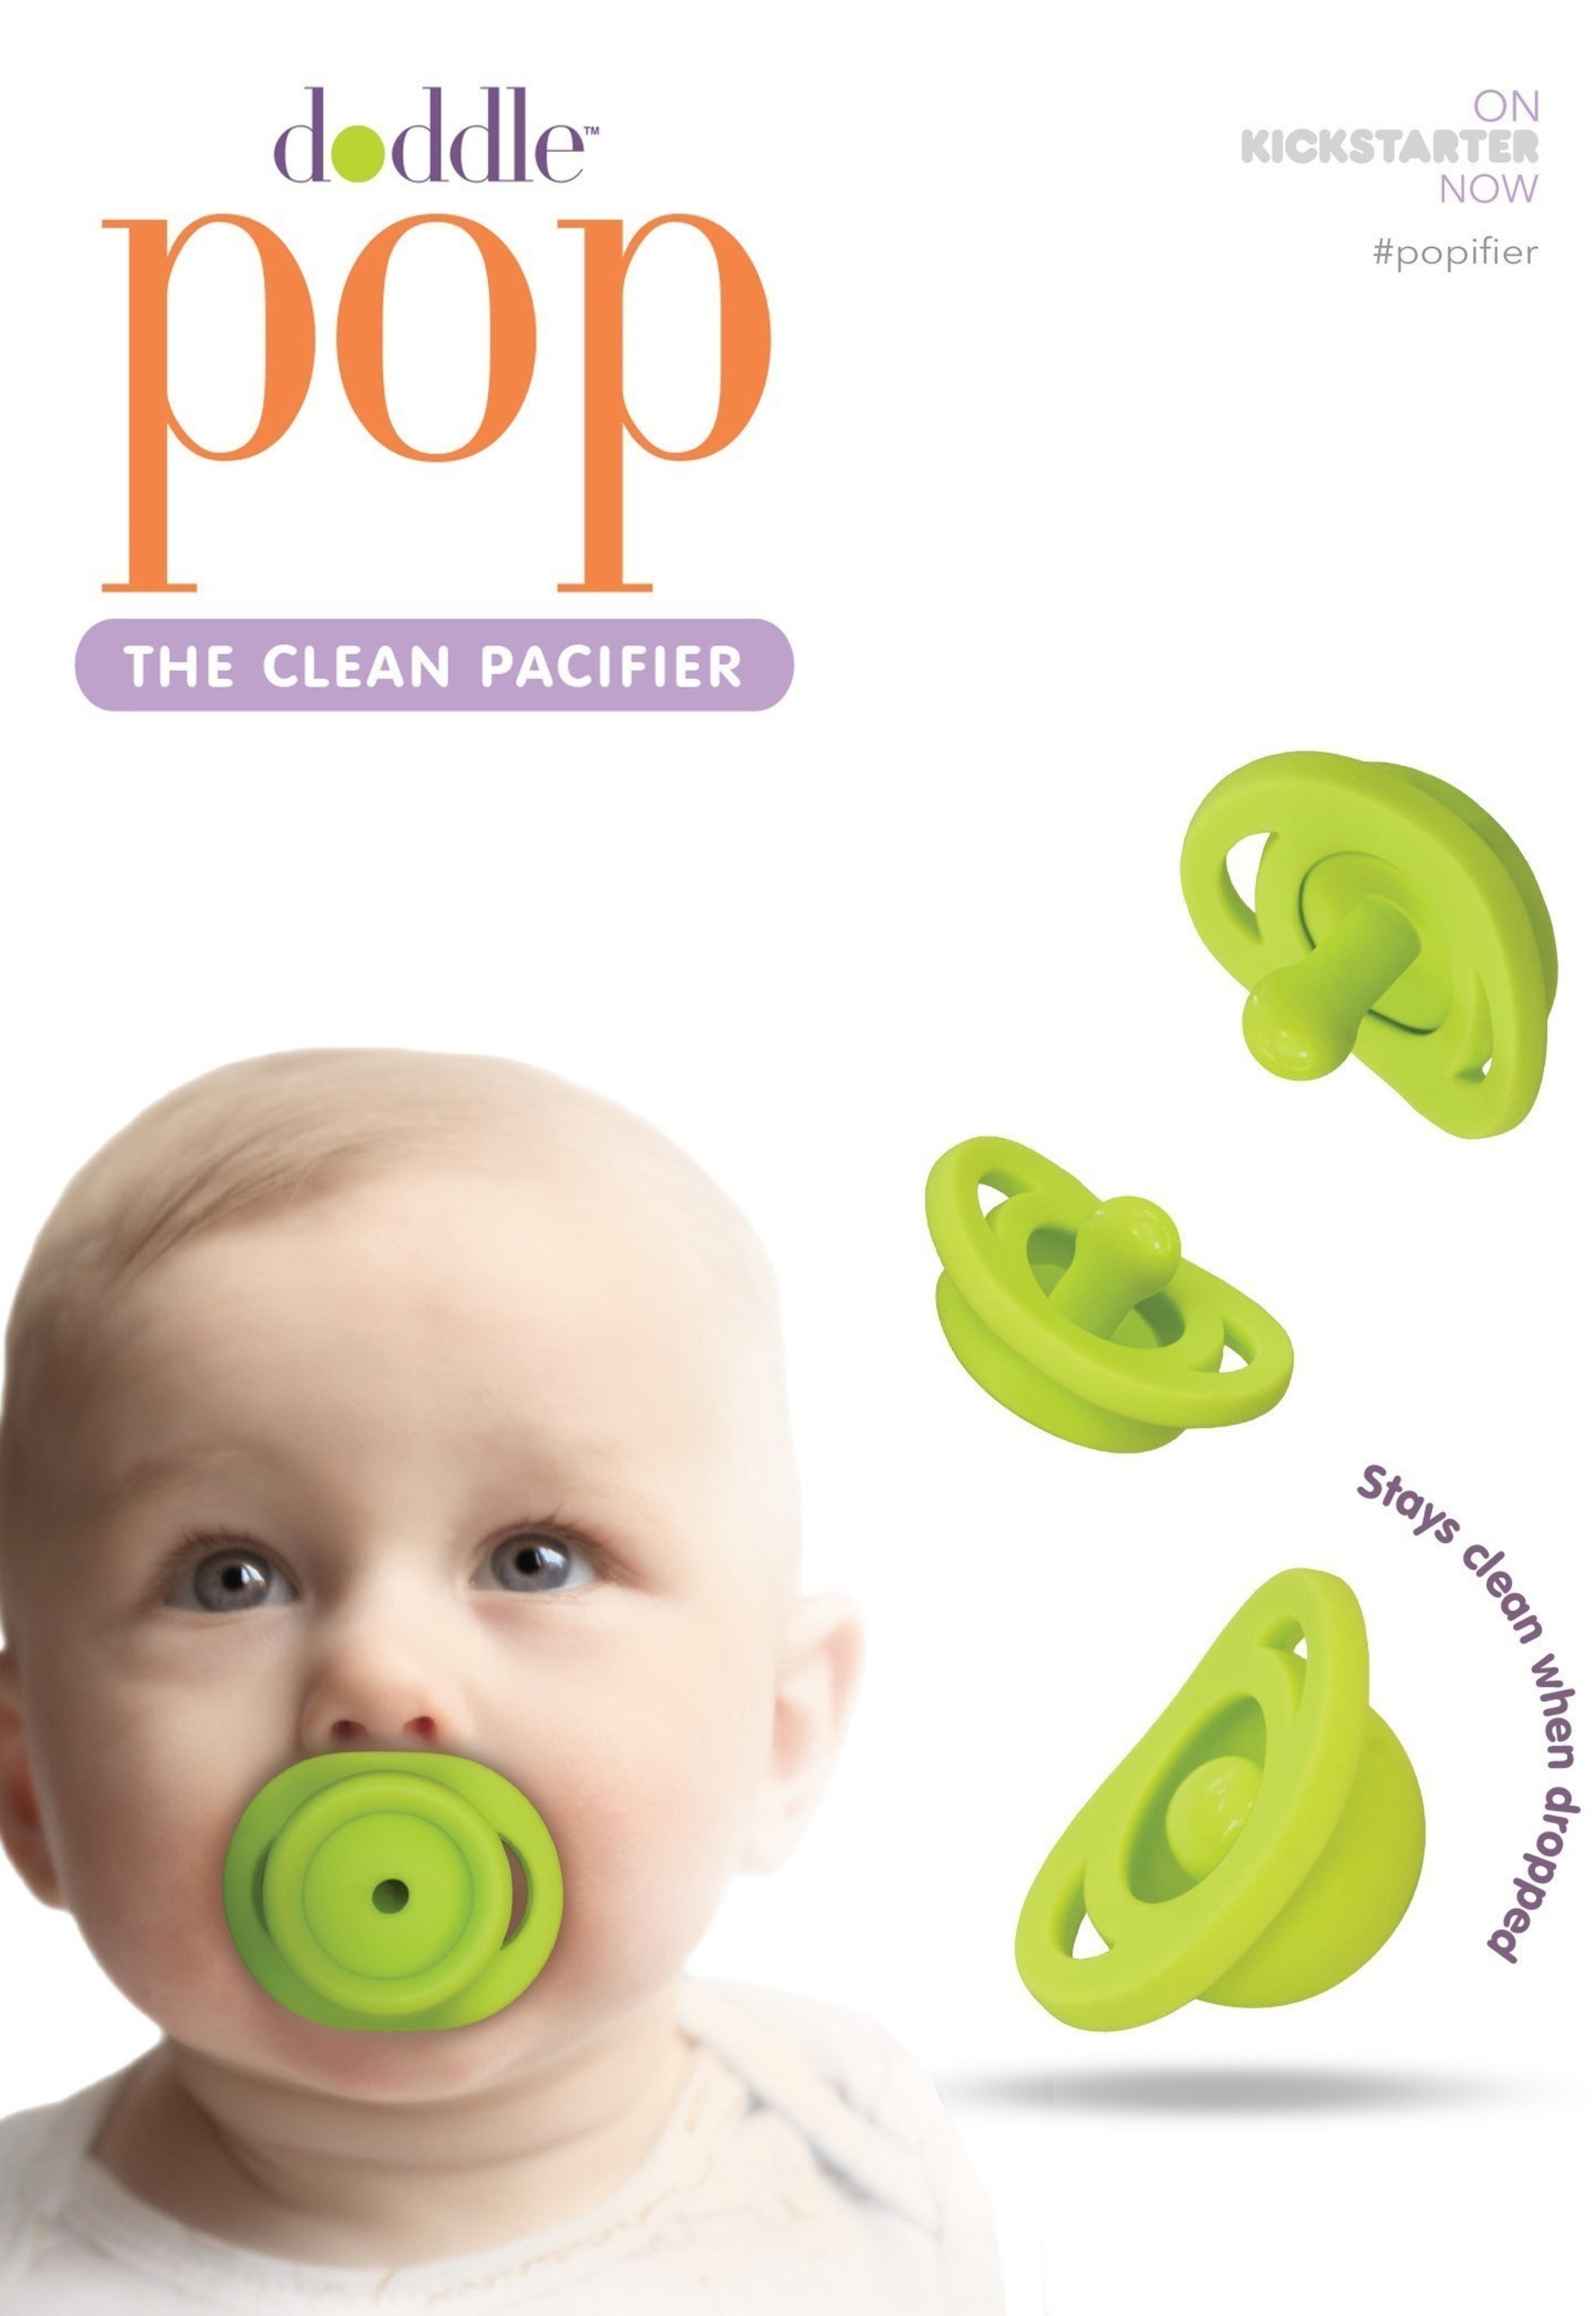 Doddle(TM) Launches Kickstarter Campaign for Innovative, Reinvented Pacifier